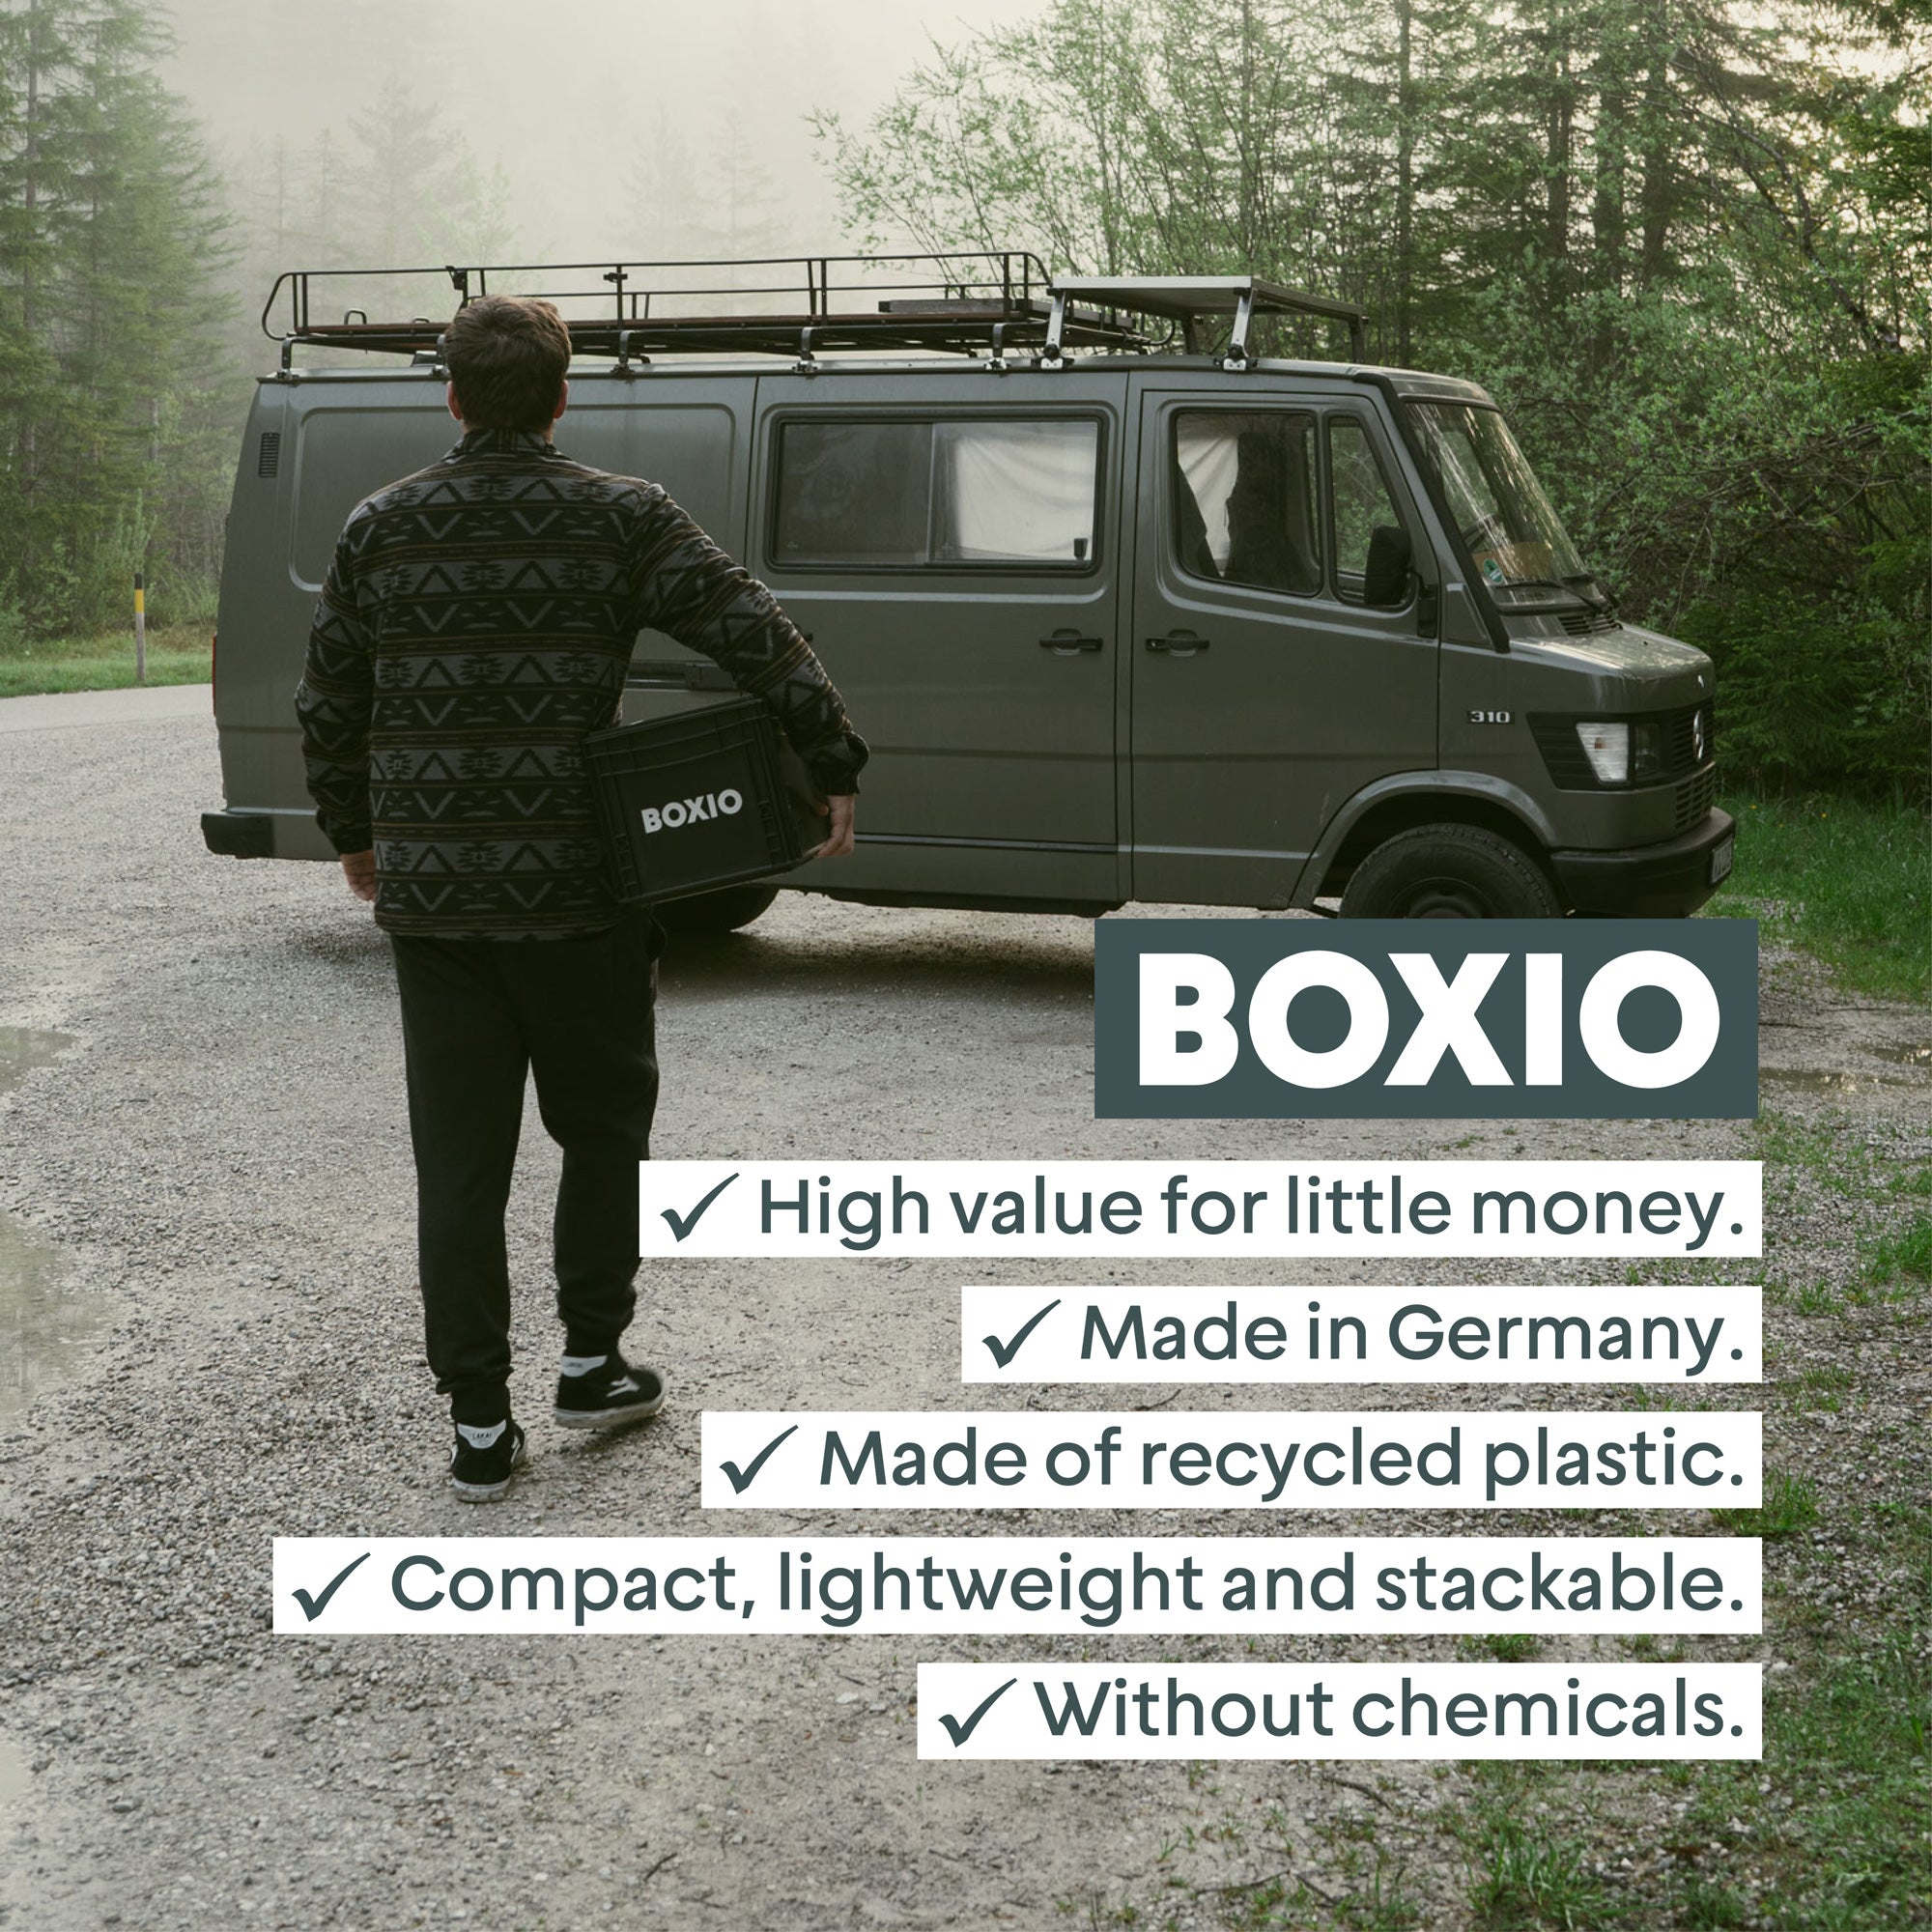 BOXIO Portable Toilet - Convenient Camping toilet! Compact, Safe, and Personal Composting Toilet with Convenient Disposal for Camping, RVing